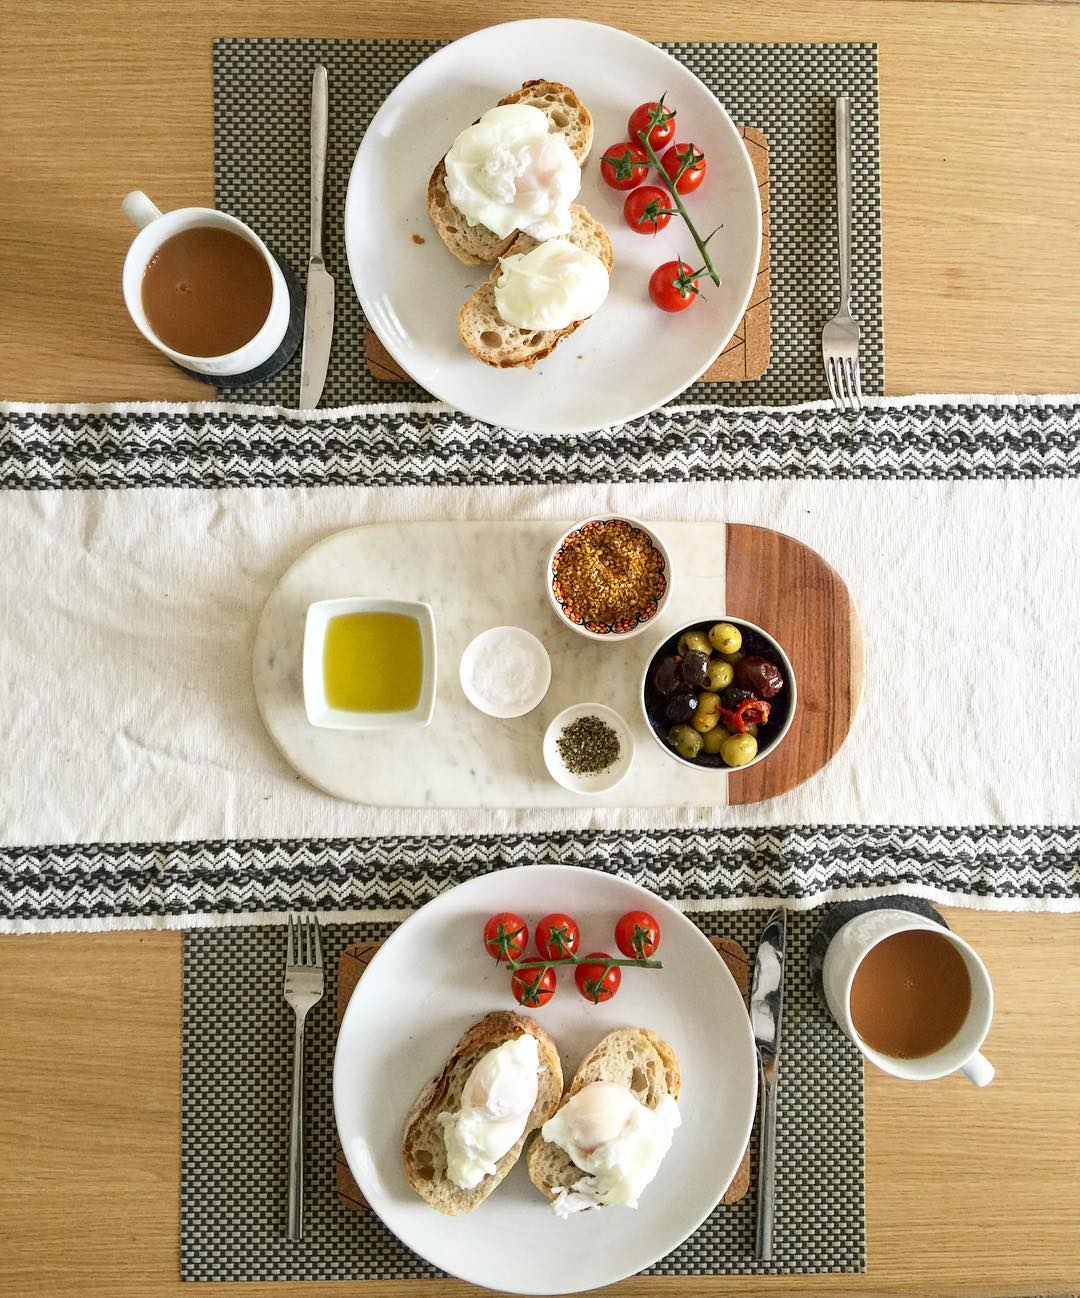 An almost symmetrical lunch set up, with props. Image courtesy of Eve O'Sullivan's Instagram (eve_osullivan)